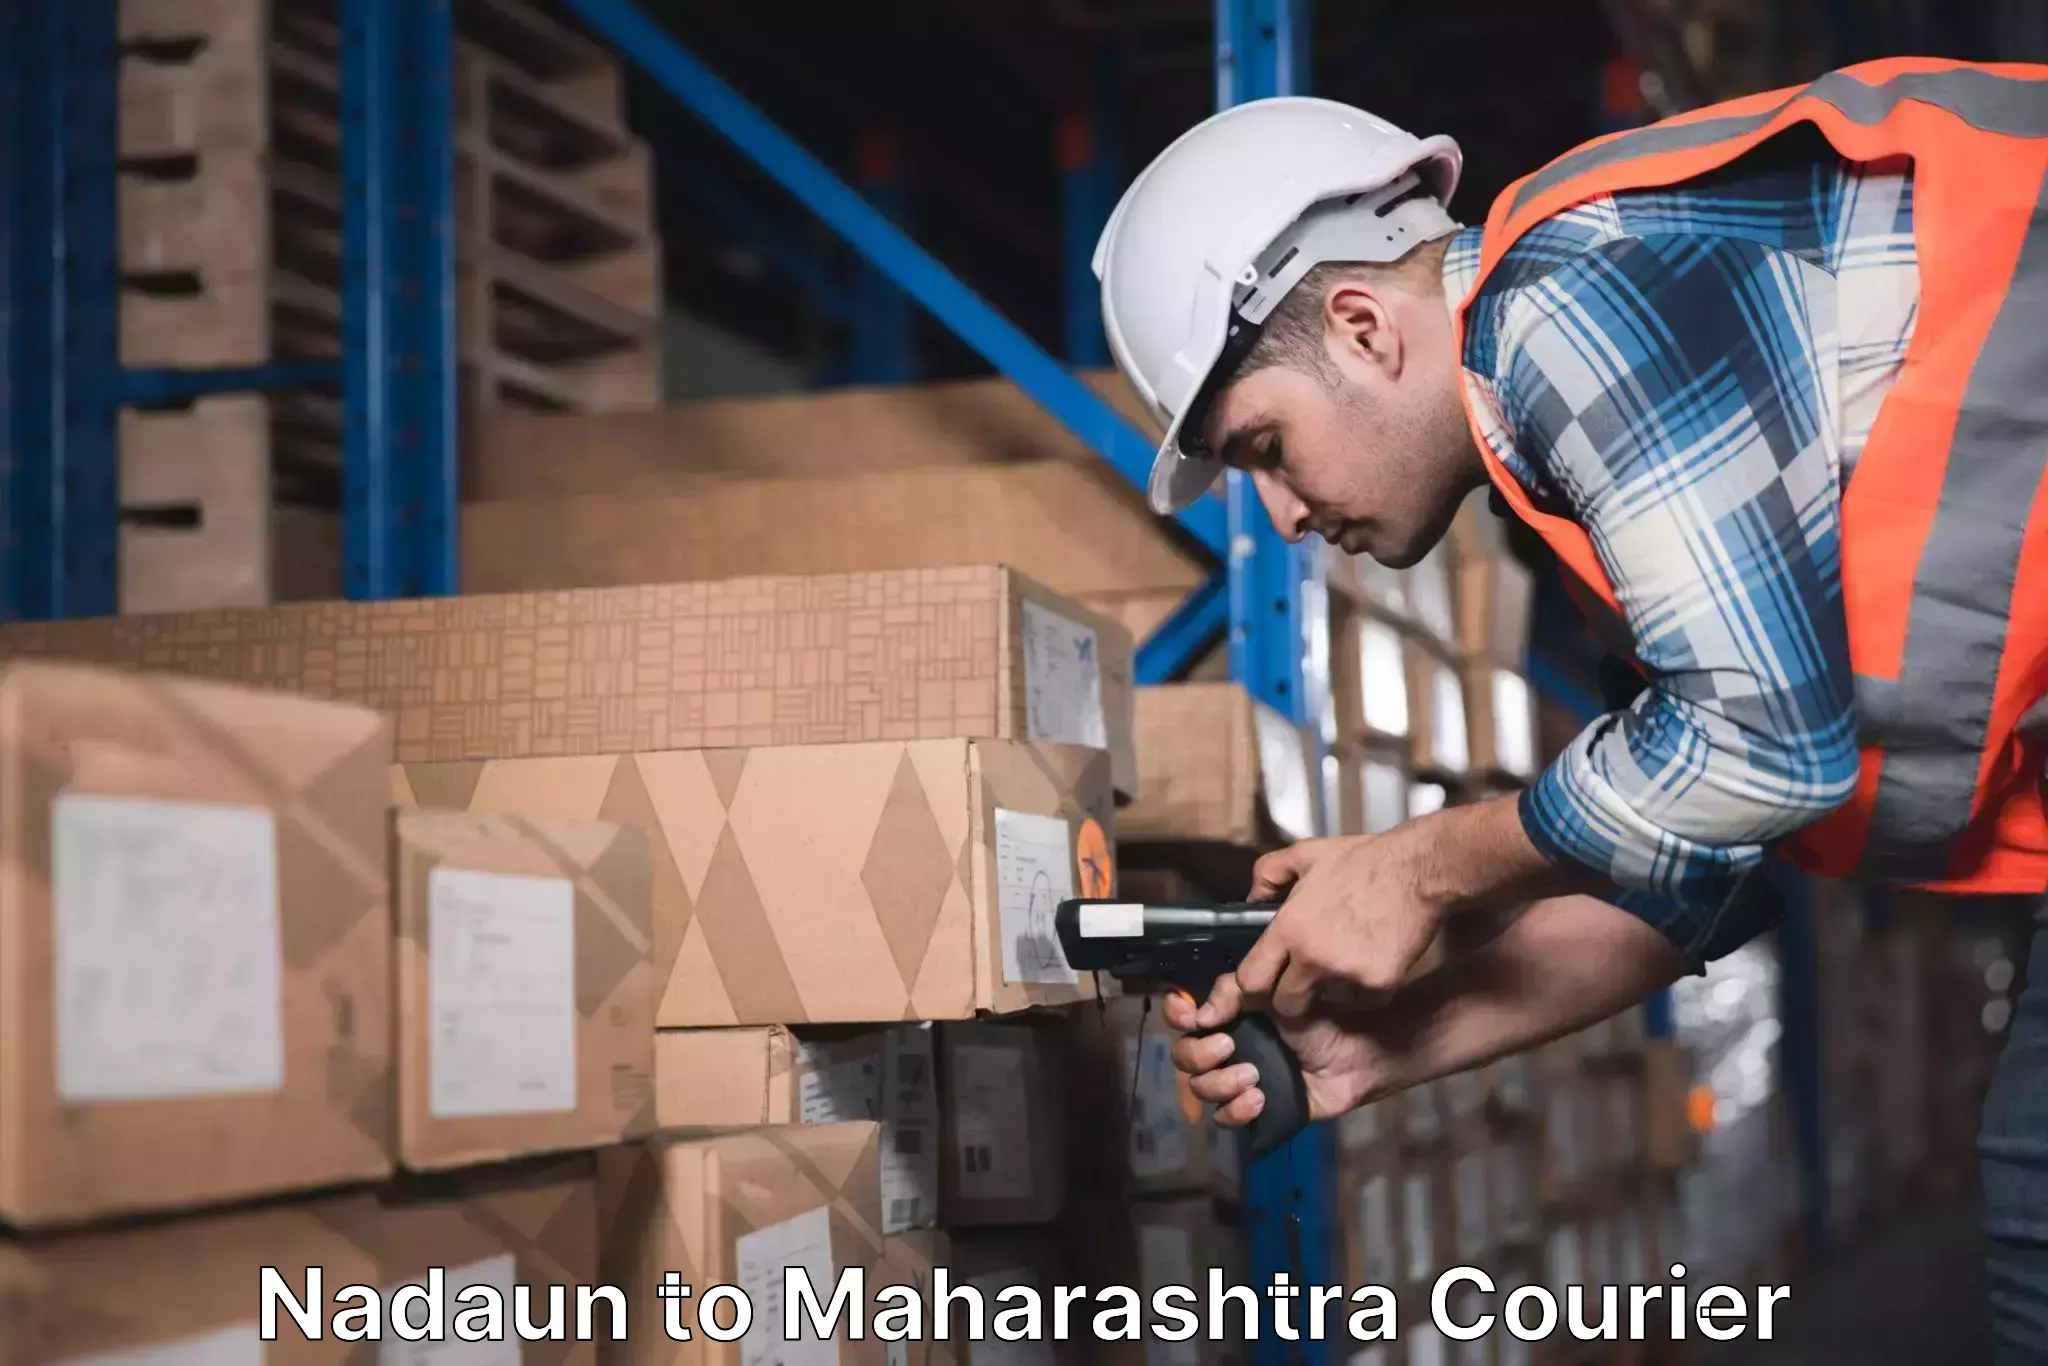 State-of-the-art courier technology Nadaun to Maharashtra